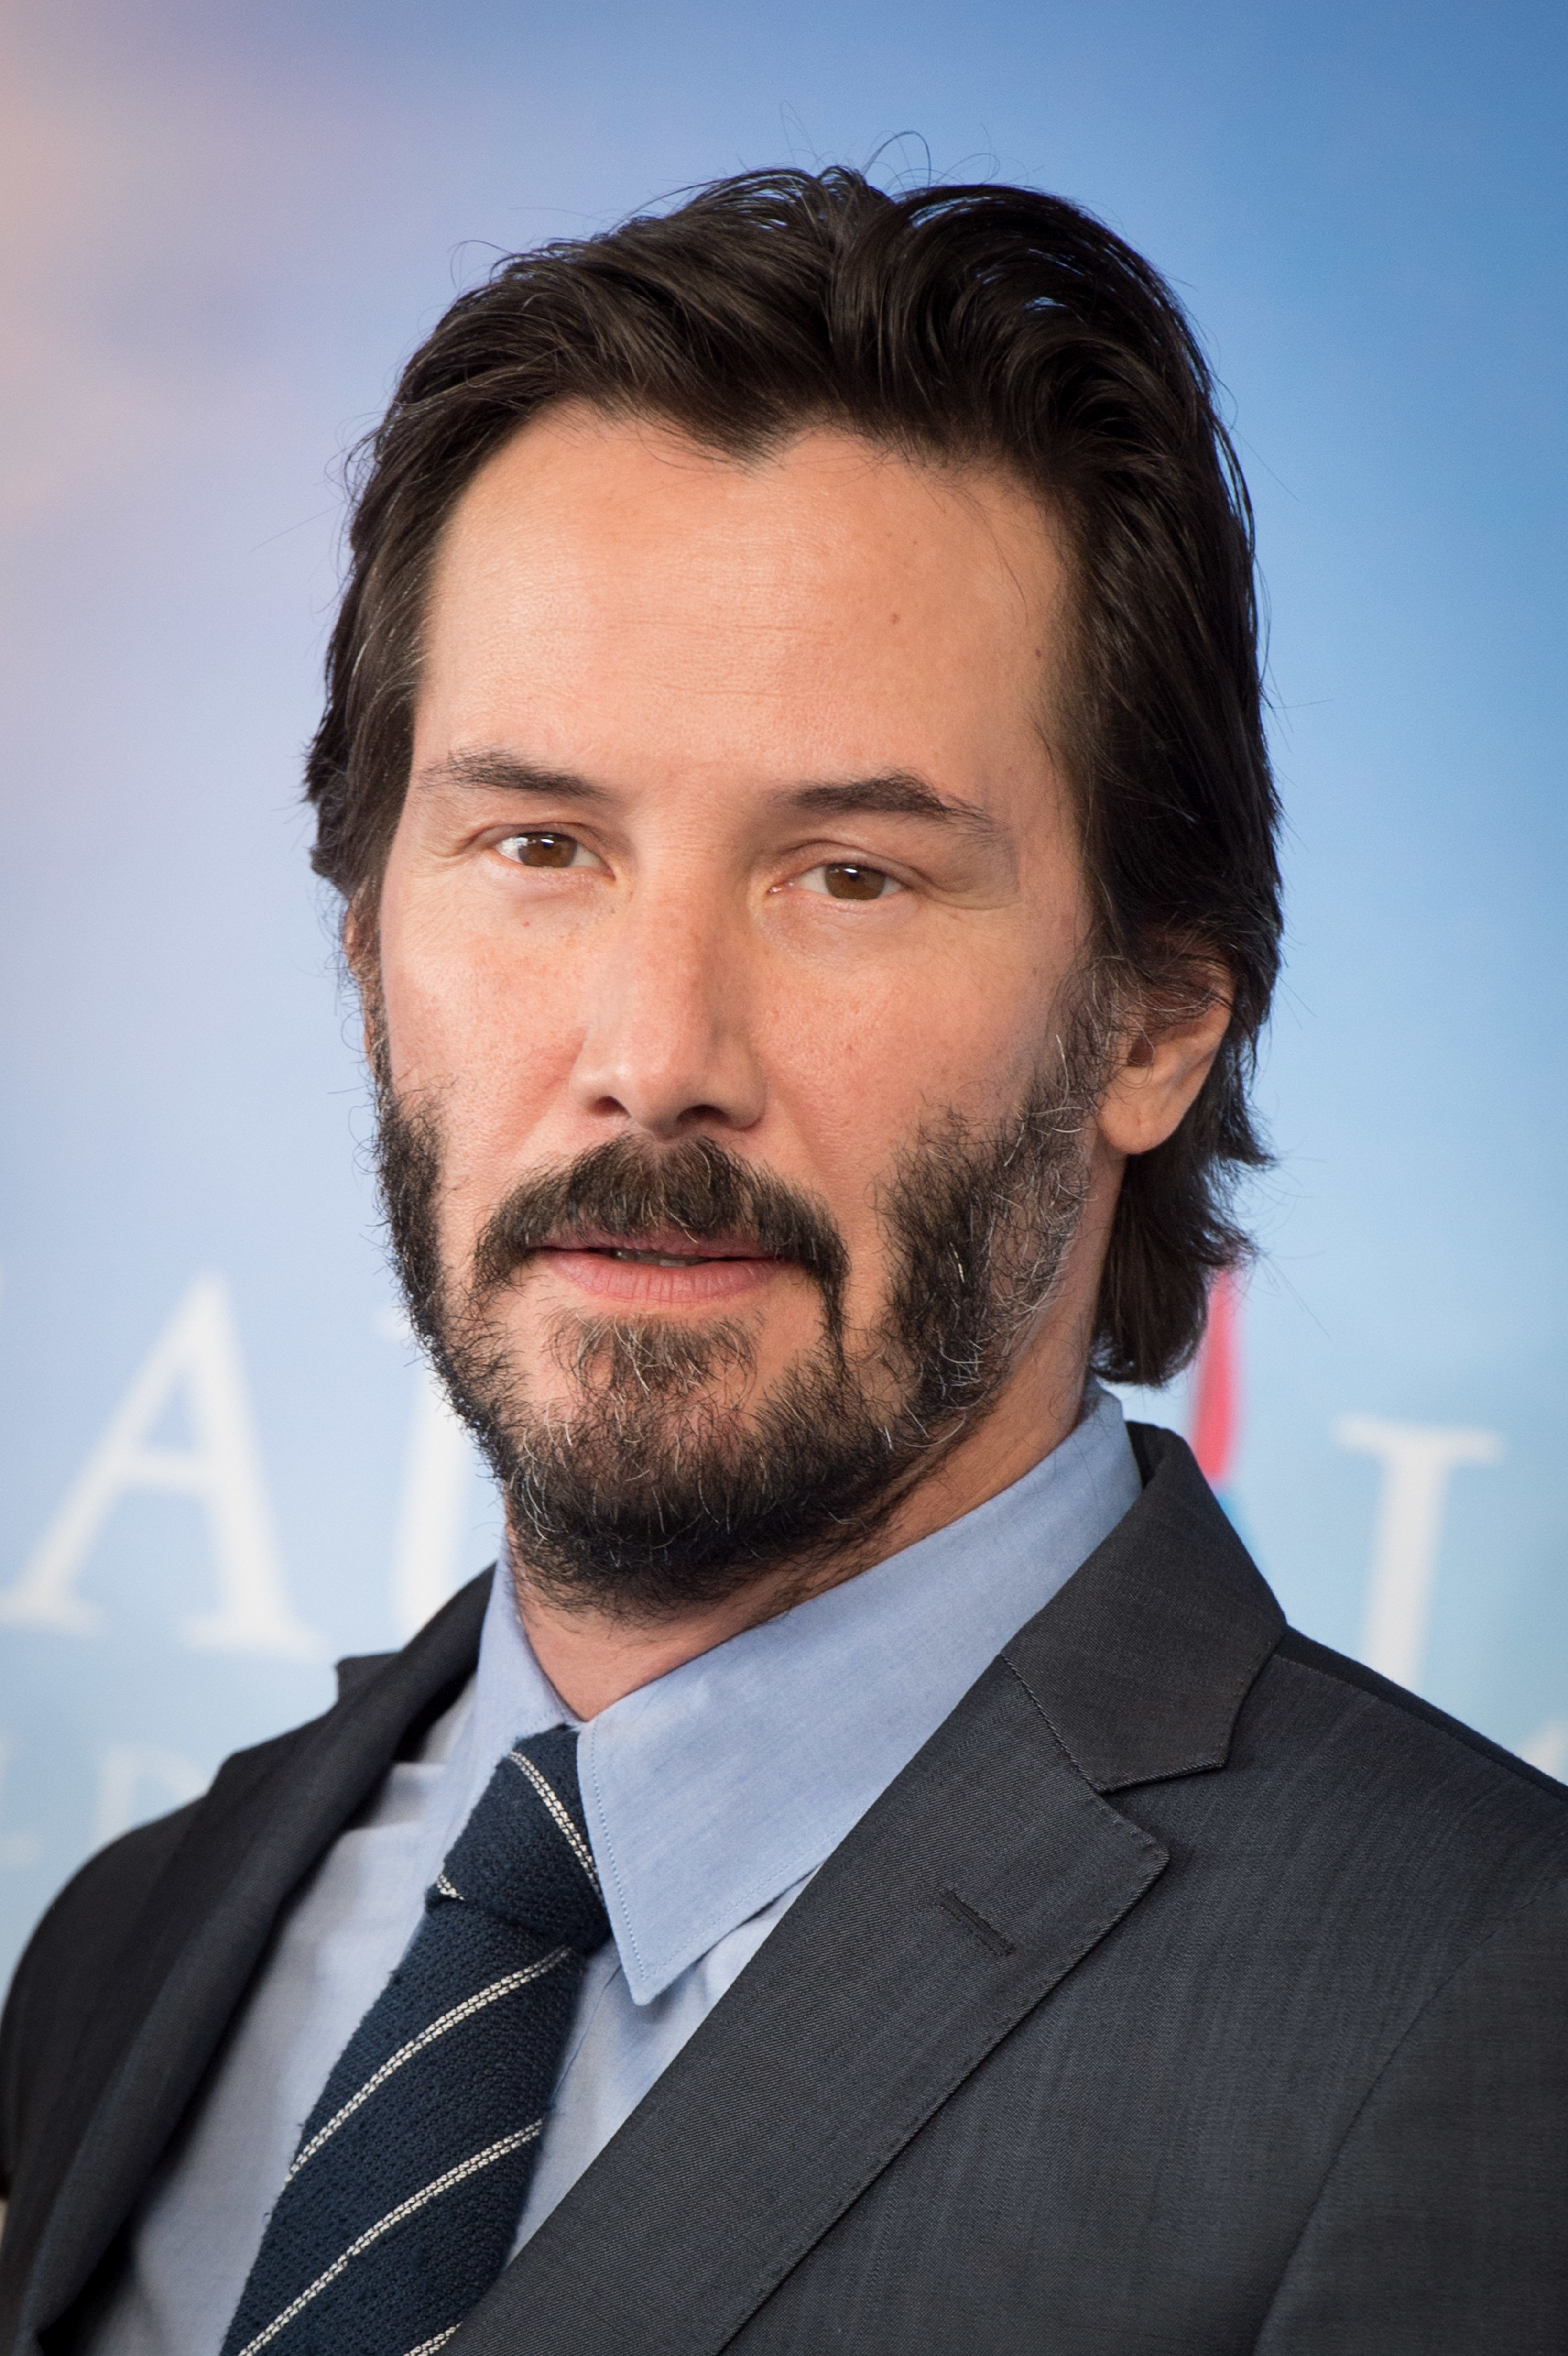 Actor Keanu Reeves attends the 'Knock Knock' photocall during the 41st Deauville American Film Festival on September 5, 2015 in Deauville, France. | Source: Getty Images